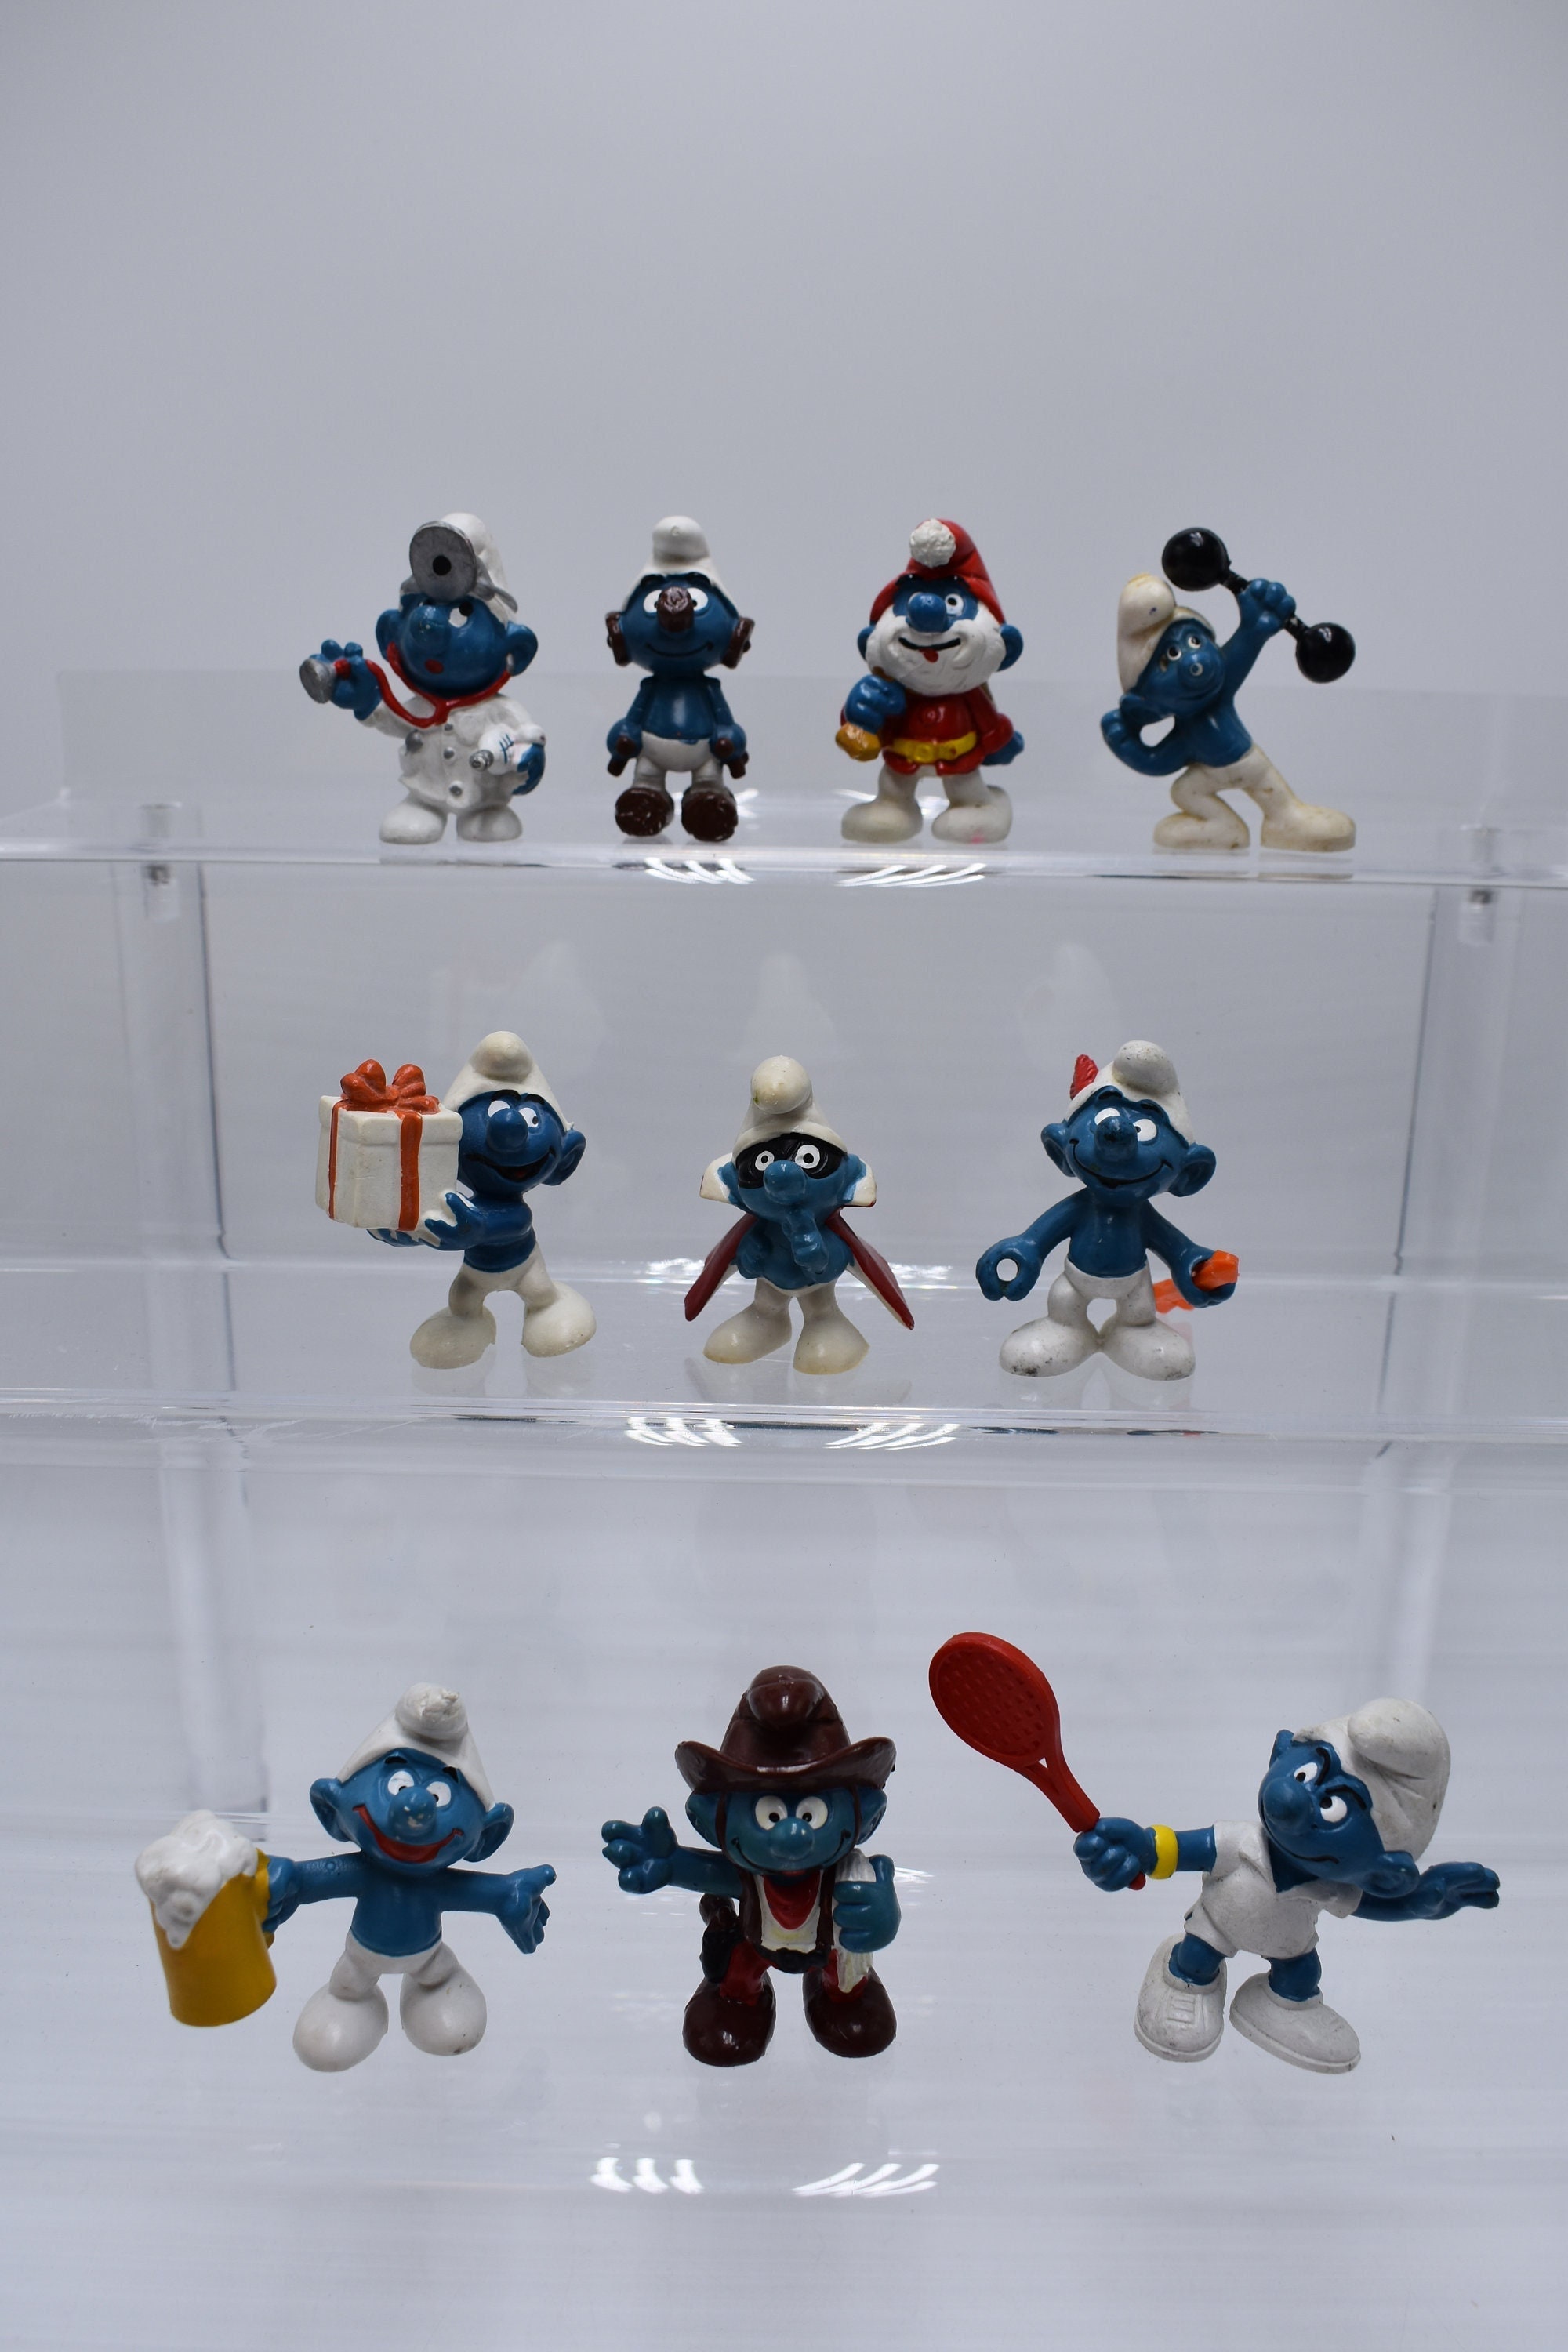 Vintage Toys, Collectible, SMURFS 1990, FOOTBALL Smurfs, Complete Series of  12 Figures, Vintage KINDER Surprise Figurines, Xmas Gift 